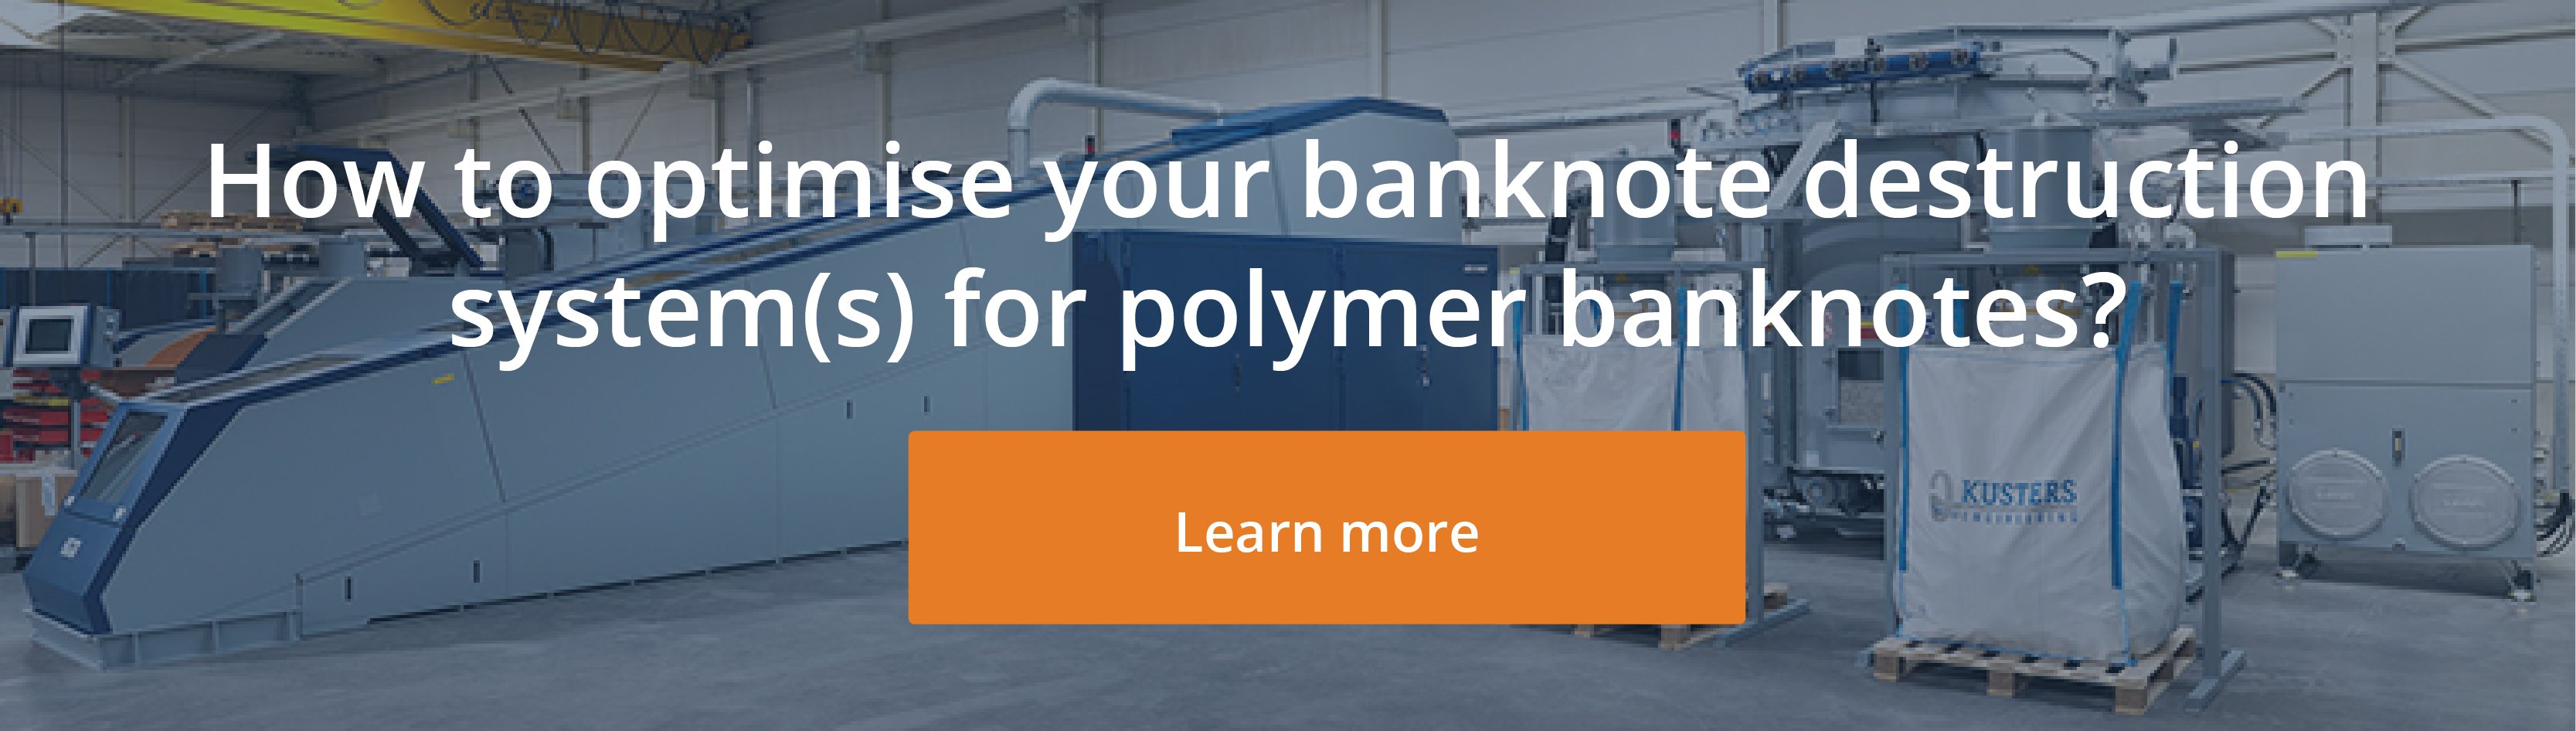 optimise your banknote destruction systems for polymer banknotes